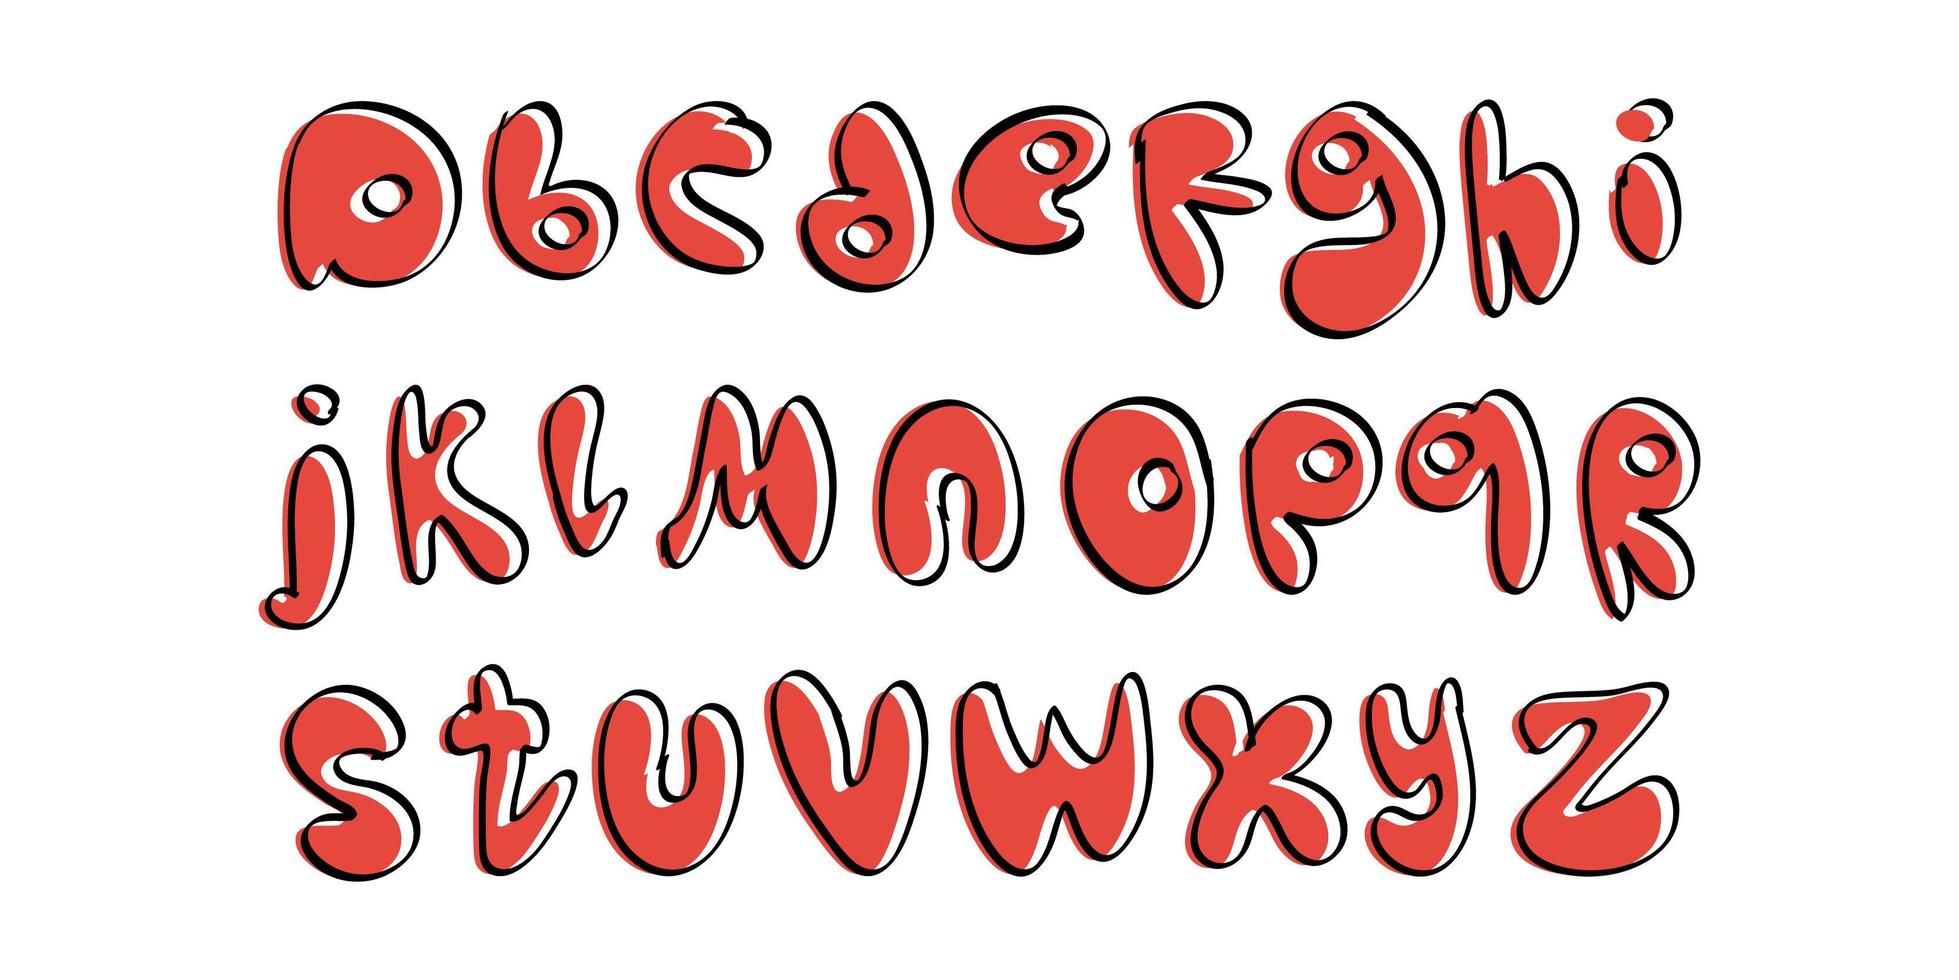 Red handwritten font in doodle style. Alphabet with rounded blown letters. Good for postcards, posters, menu designs or children's books. Vector illustration.